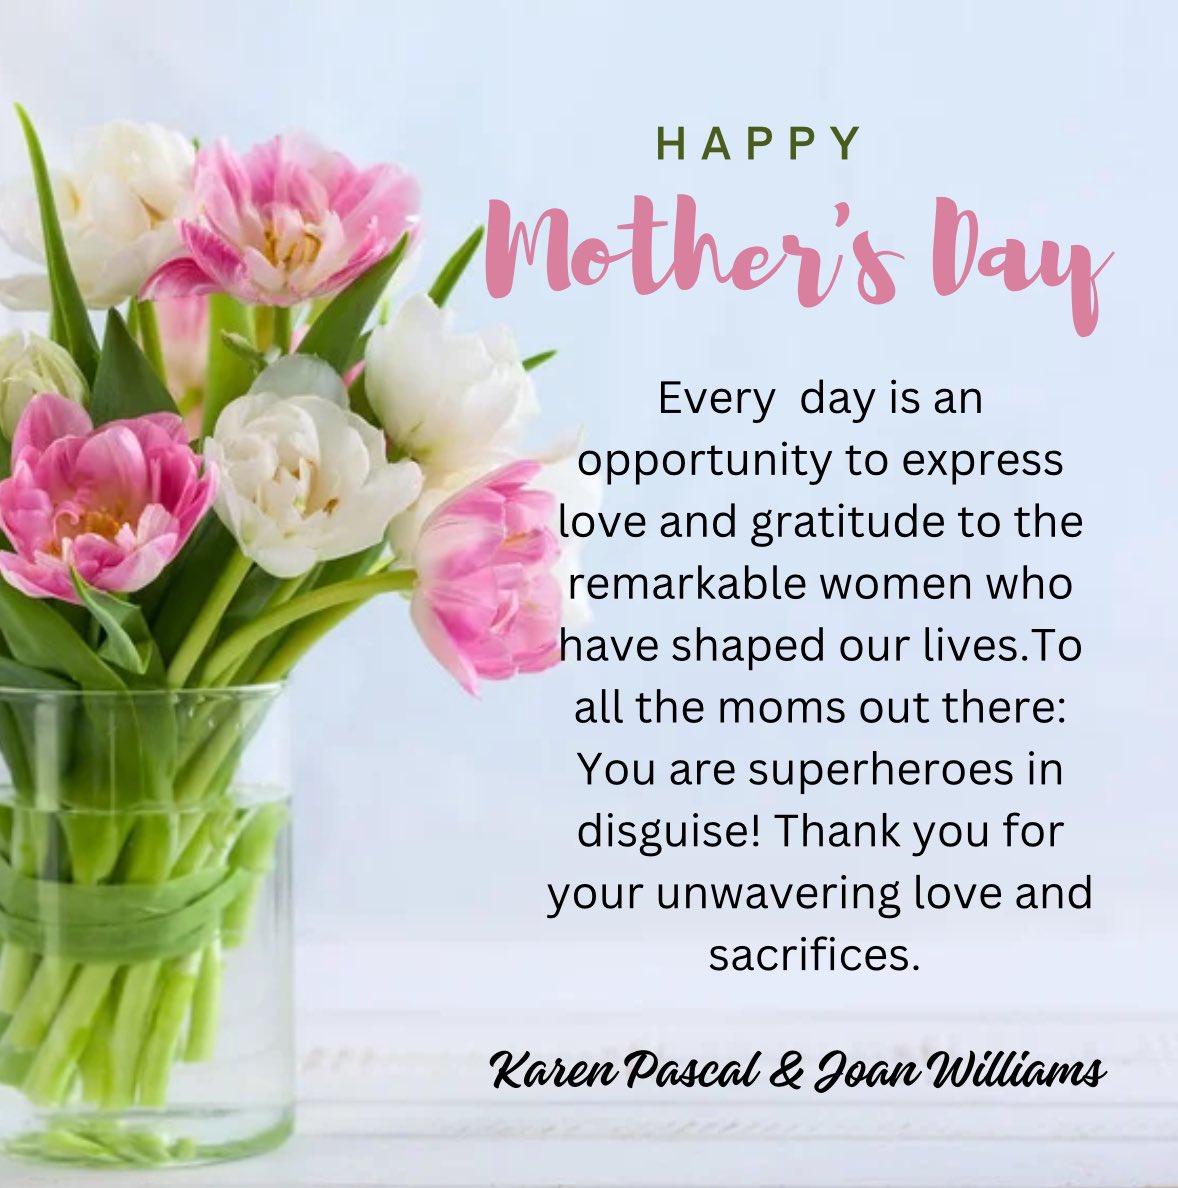 Happy Mother's Day. Let's also celebrate the men who step into nurturing roles.
Men who fill in as mothers. Their love, care, and support are equally valuable. Let's honor these great men.
#stress #stressrelief #believeinyourself #MotherDay #mothersday2024 #gym #healing #wellness